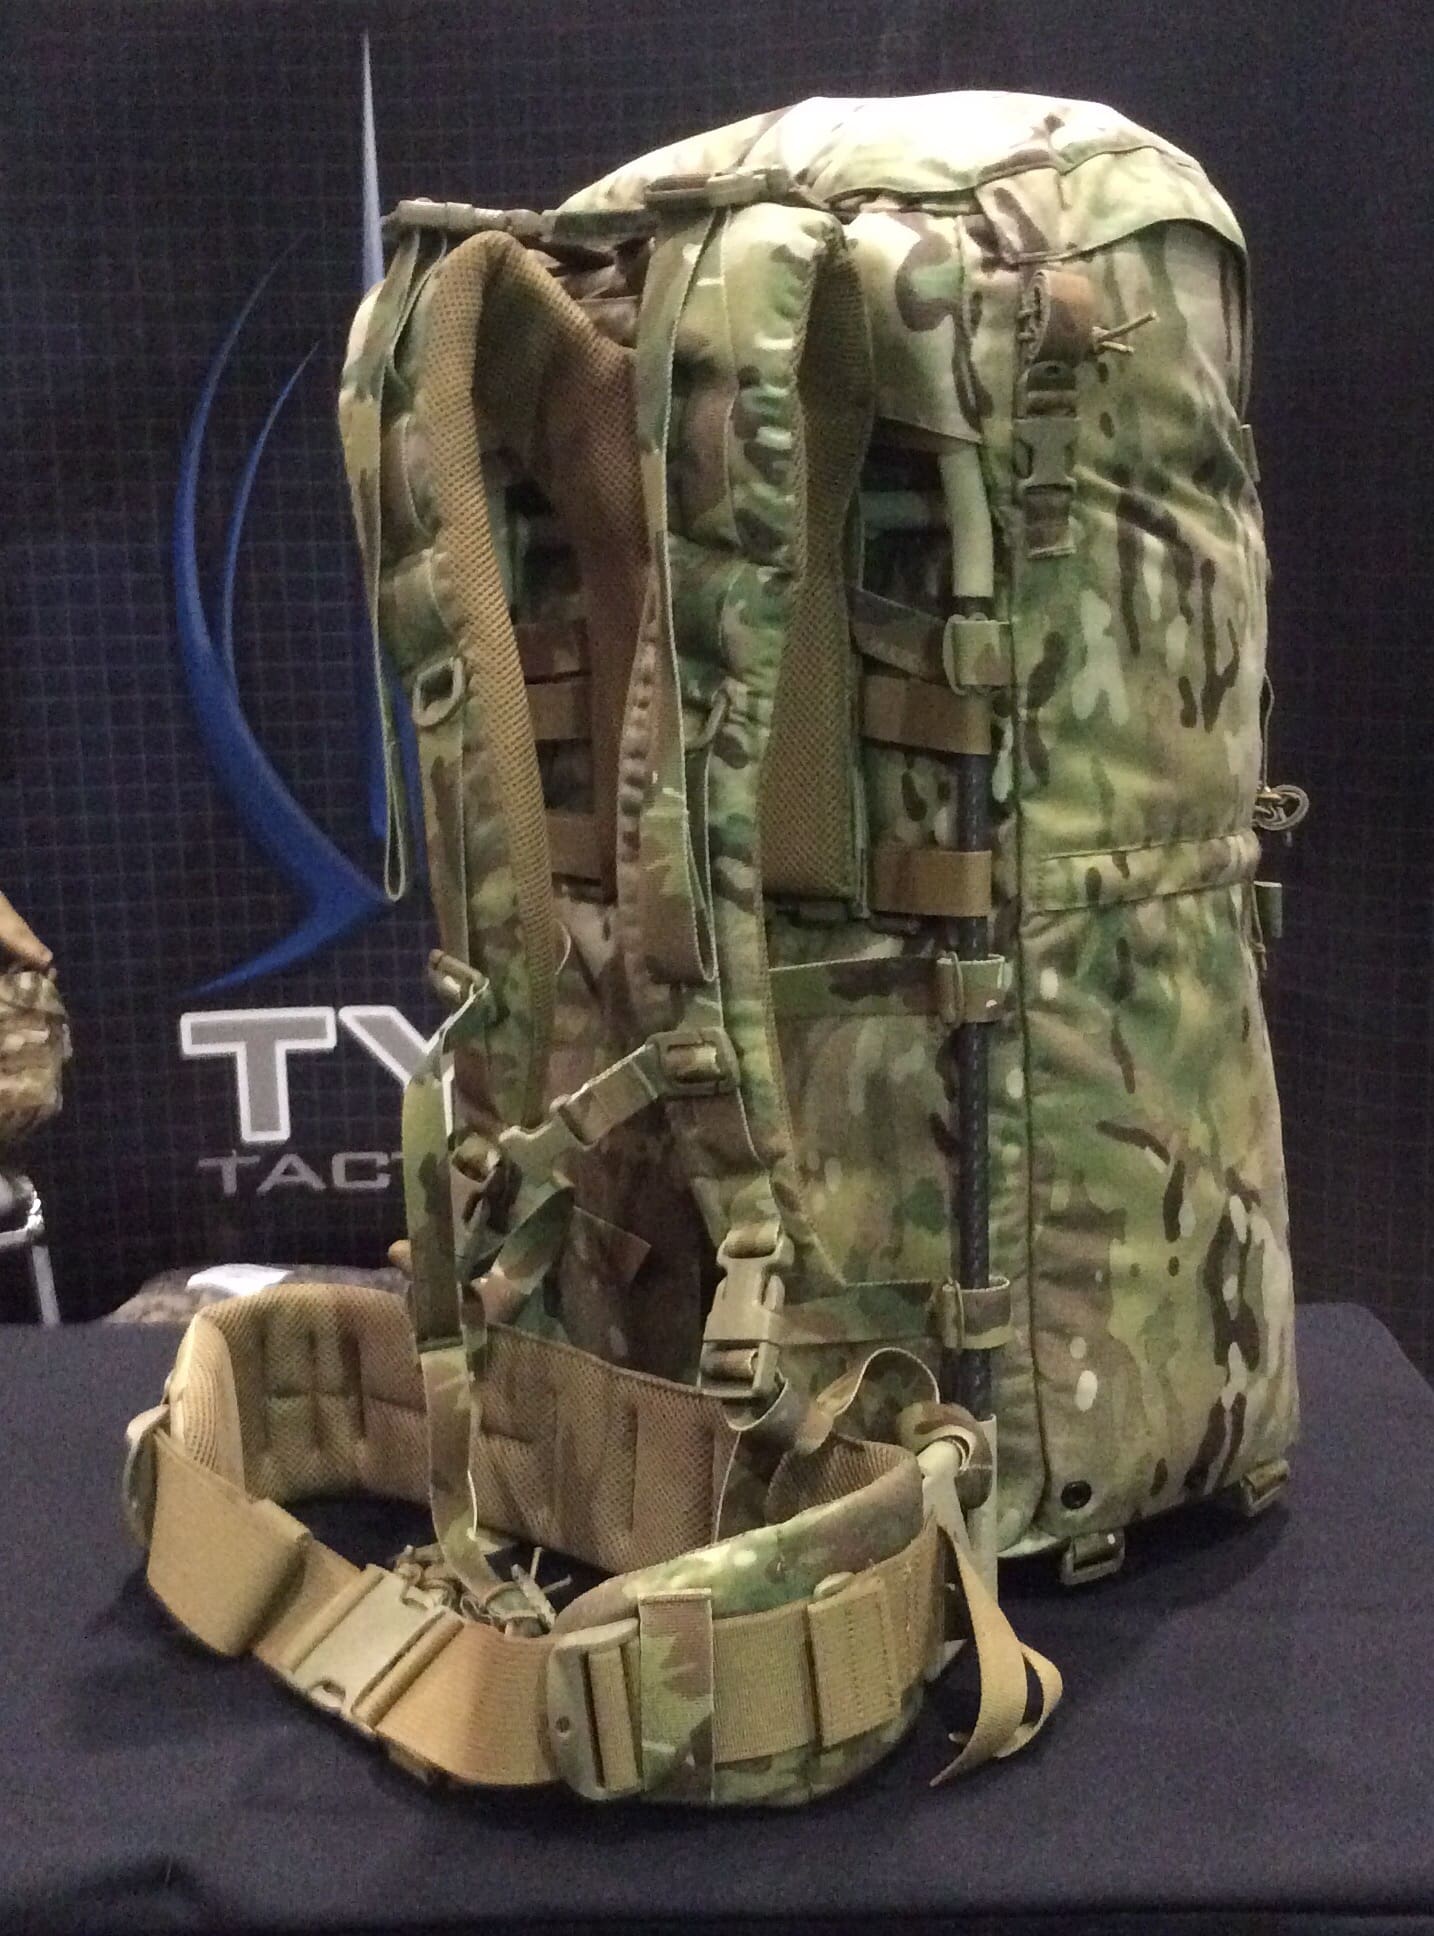 Load Carrying « Tactical Fanboy